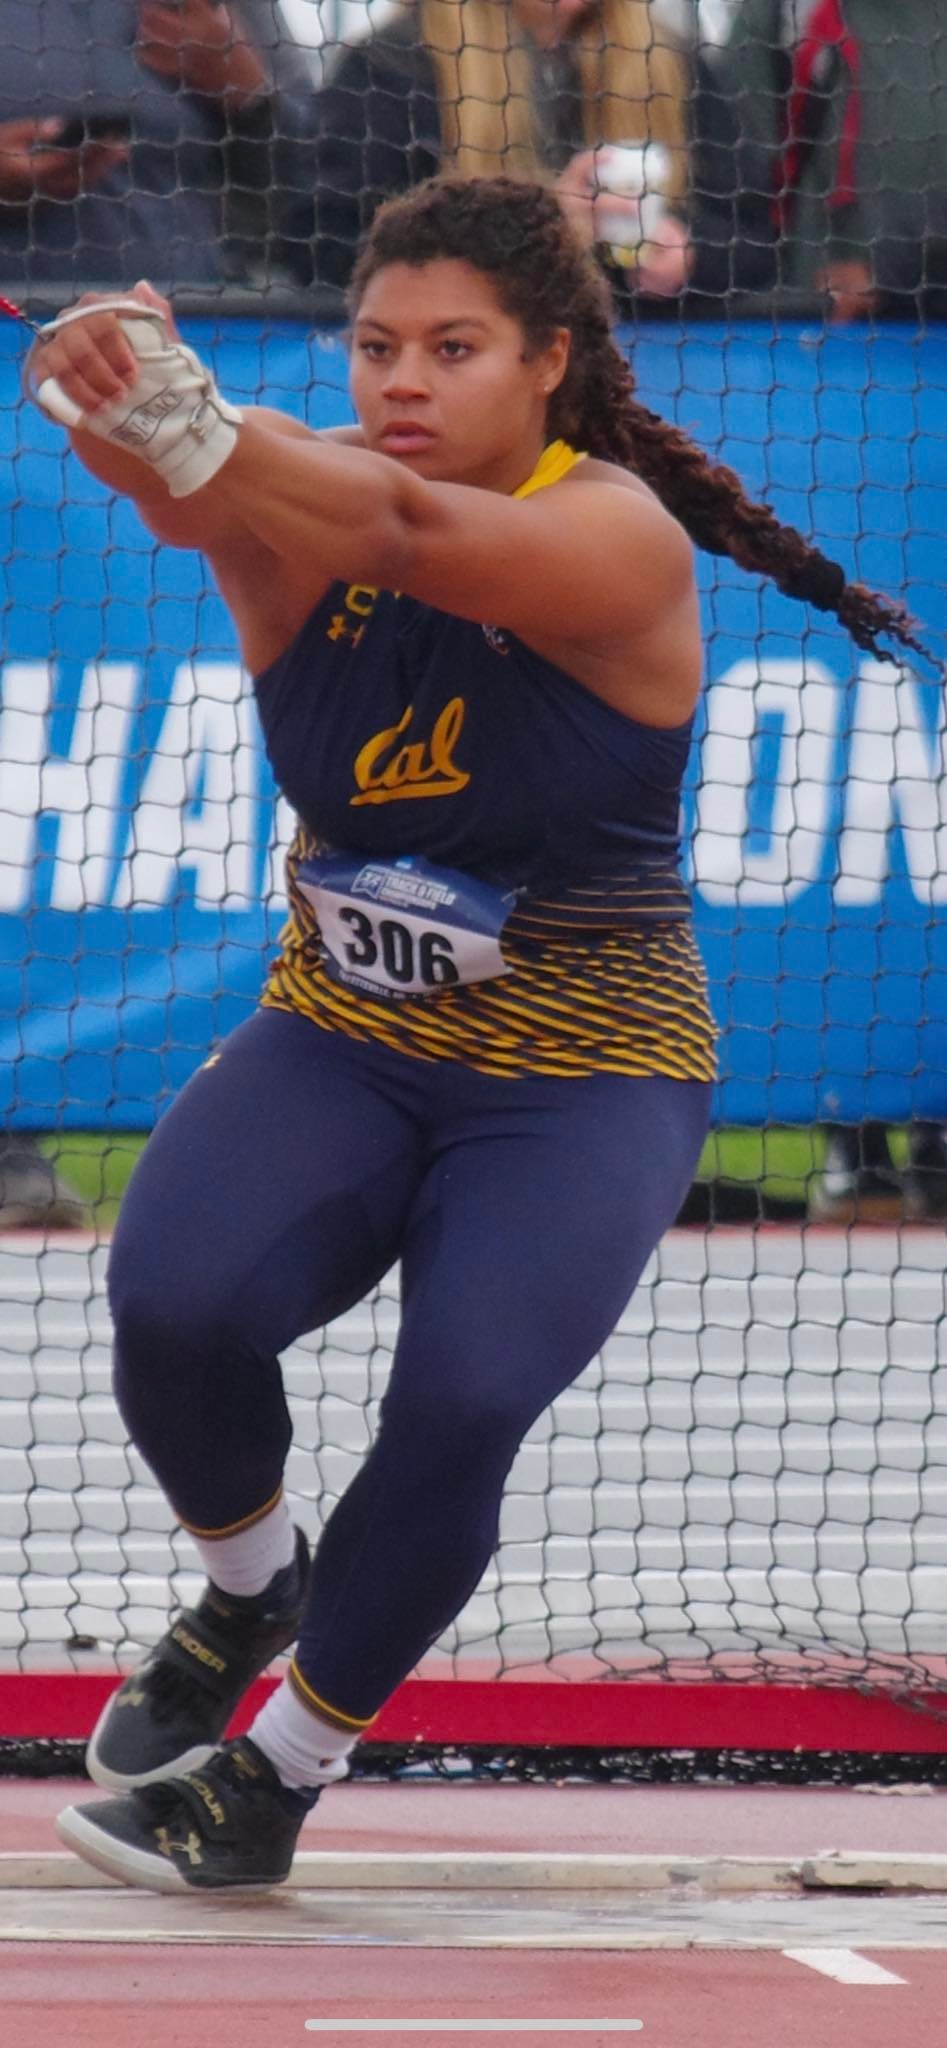 Track and field athlete Camryn Rogers, wearing a blue and yellow Cal uniform, is captured in action during a hammer throw event.